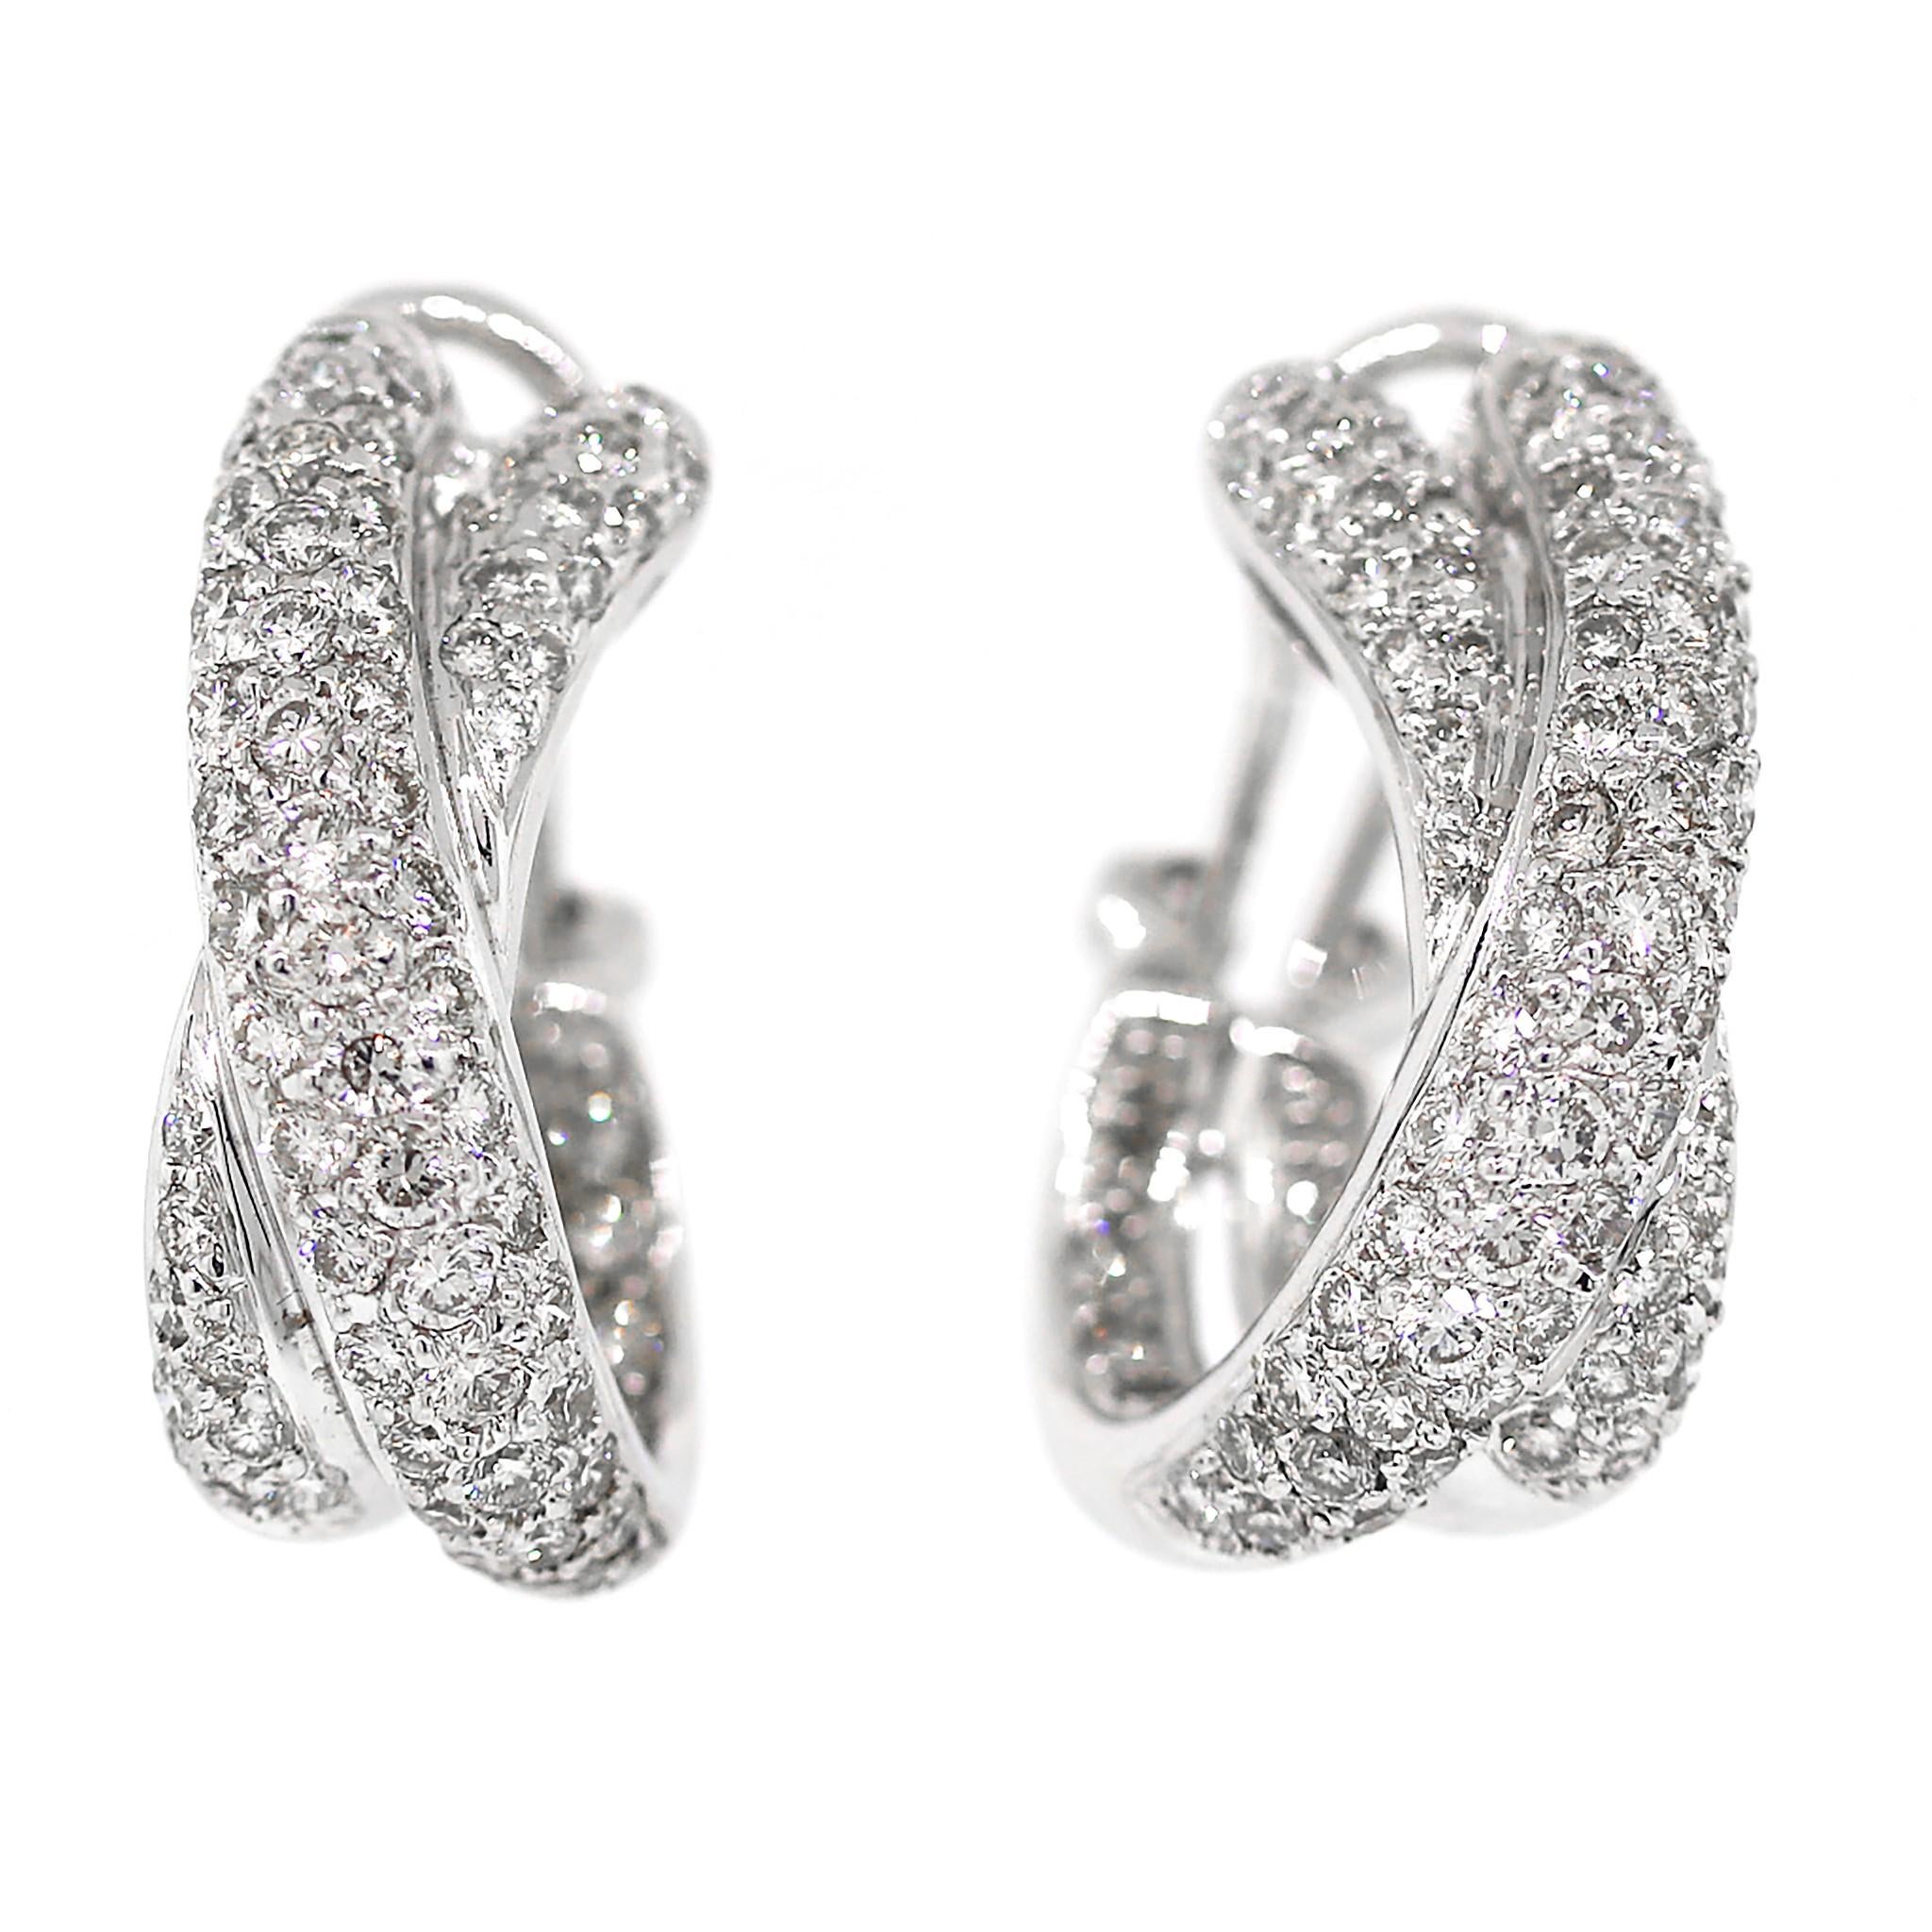 2.06 carat Diamond Crossover Earrings in 18 kt White Gold In Good Condition For Sale In New York, NY